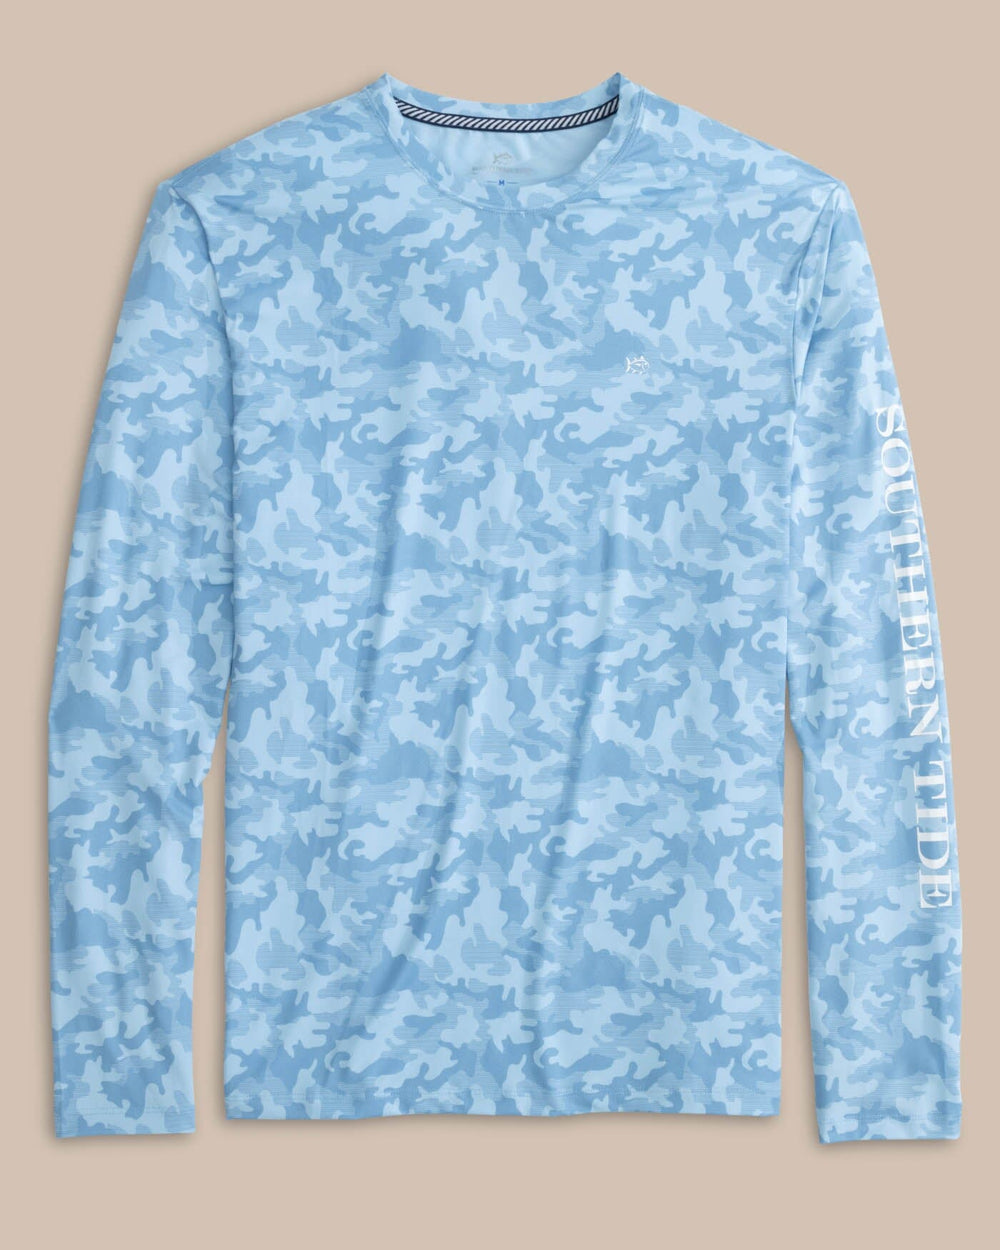 The front view of the Southern Tide Island Camo Long Sleeve Performance T-shirt by Southern Tide - Clearwater Blue